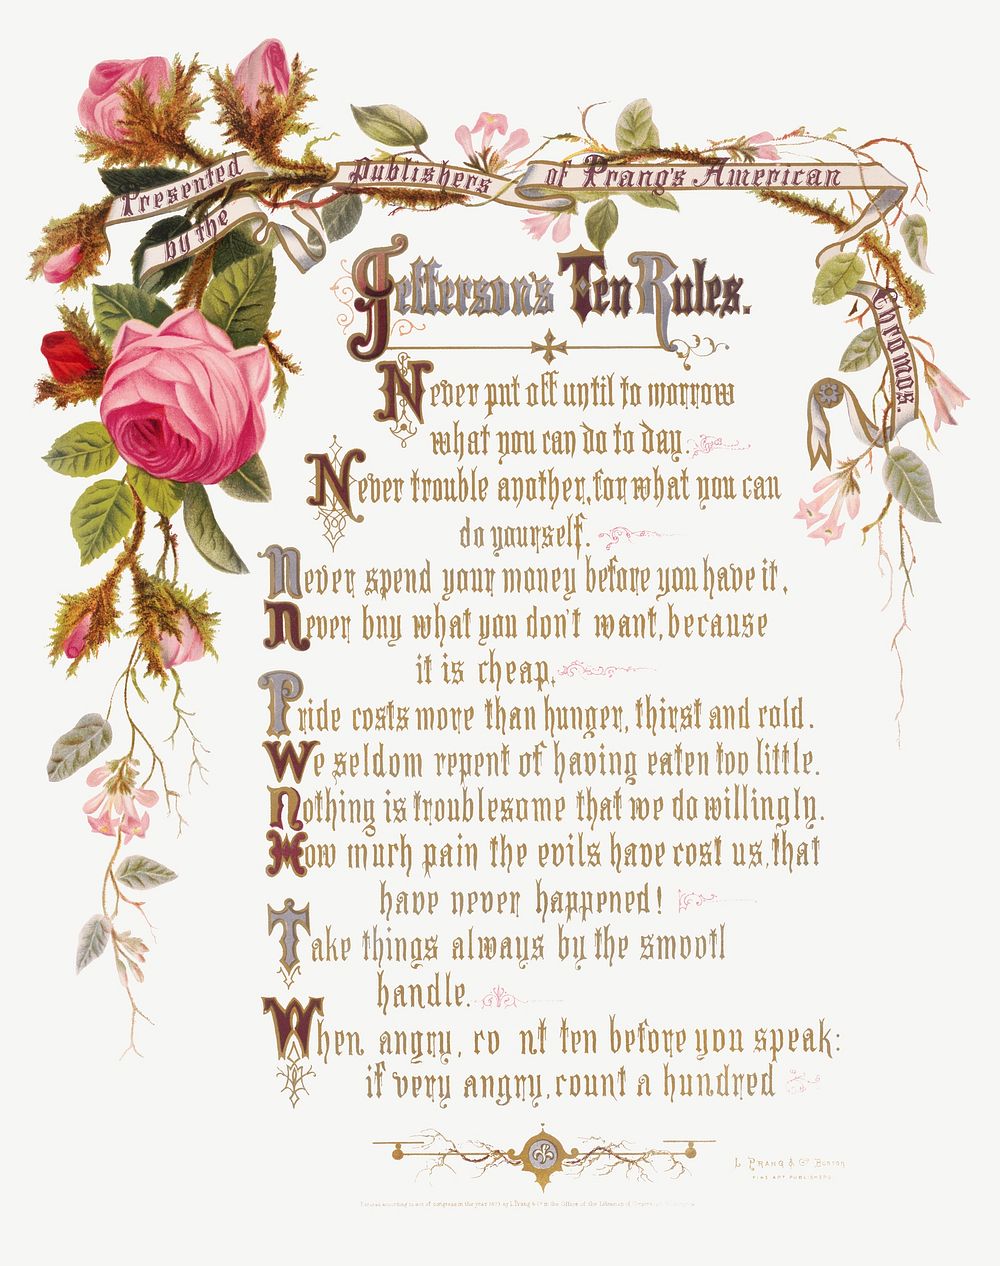 Jefferson's ten rules. Presented by the publishers of Prang's American chromos (1873) in high resolution by L. Prang & Co.…